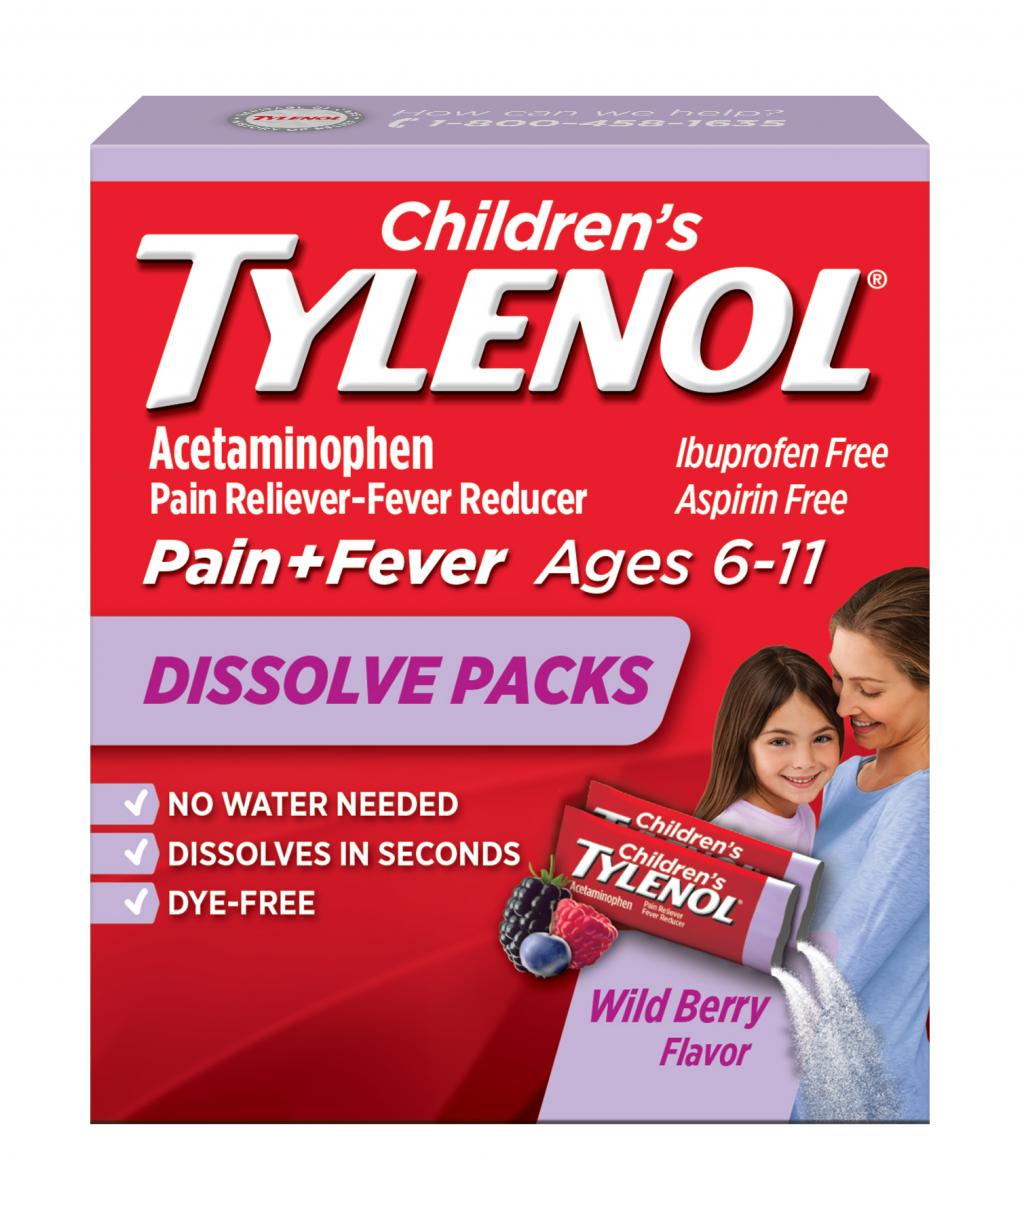 Childrens Tylenol® Acetaminophen Dissolve Packs For Pain And Fever